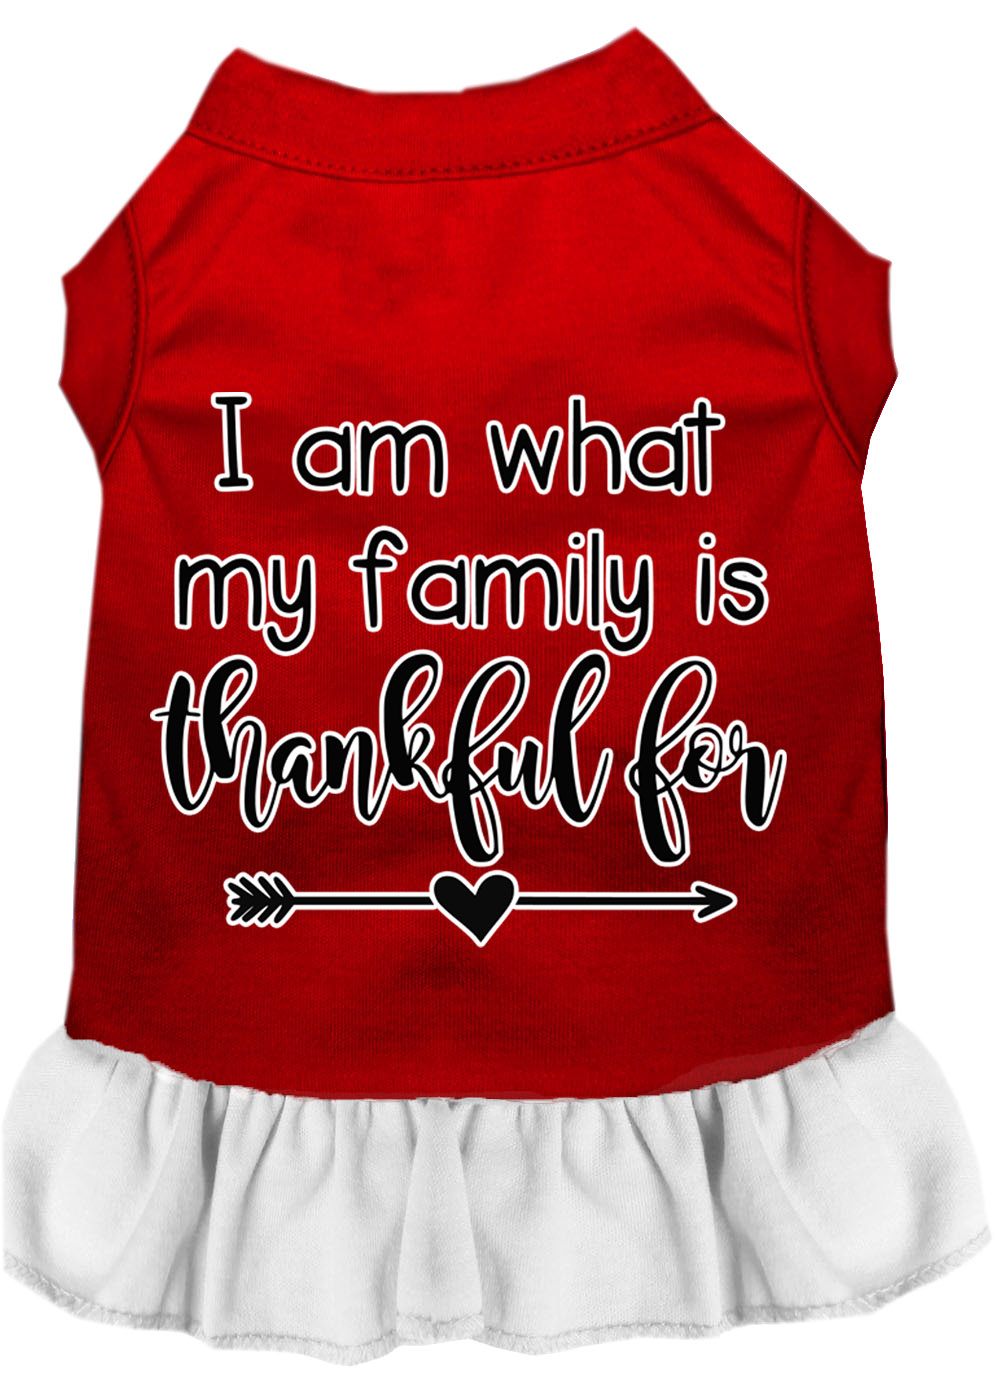 I Am What My Family is Thankful For Screen Print Dog Dress Red with White Med